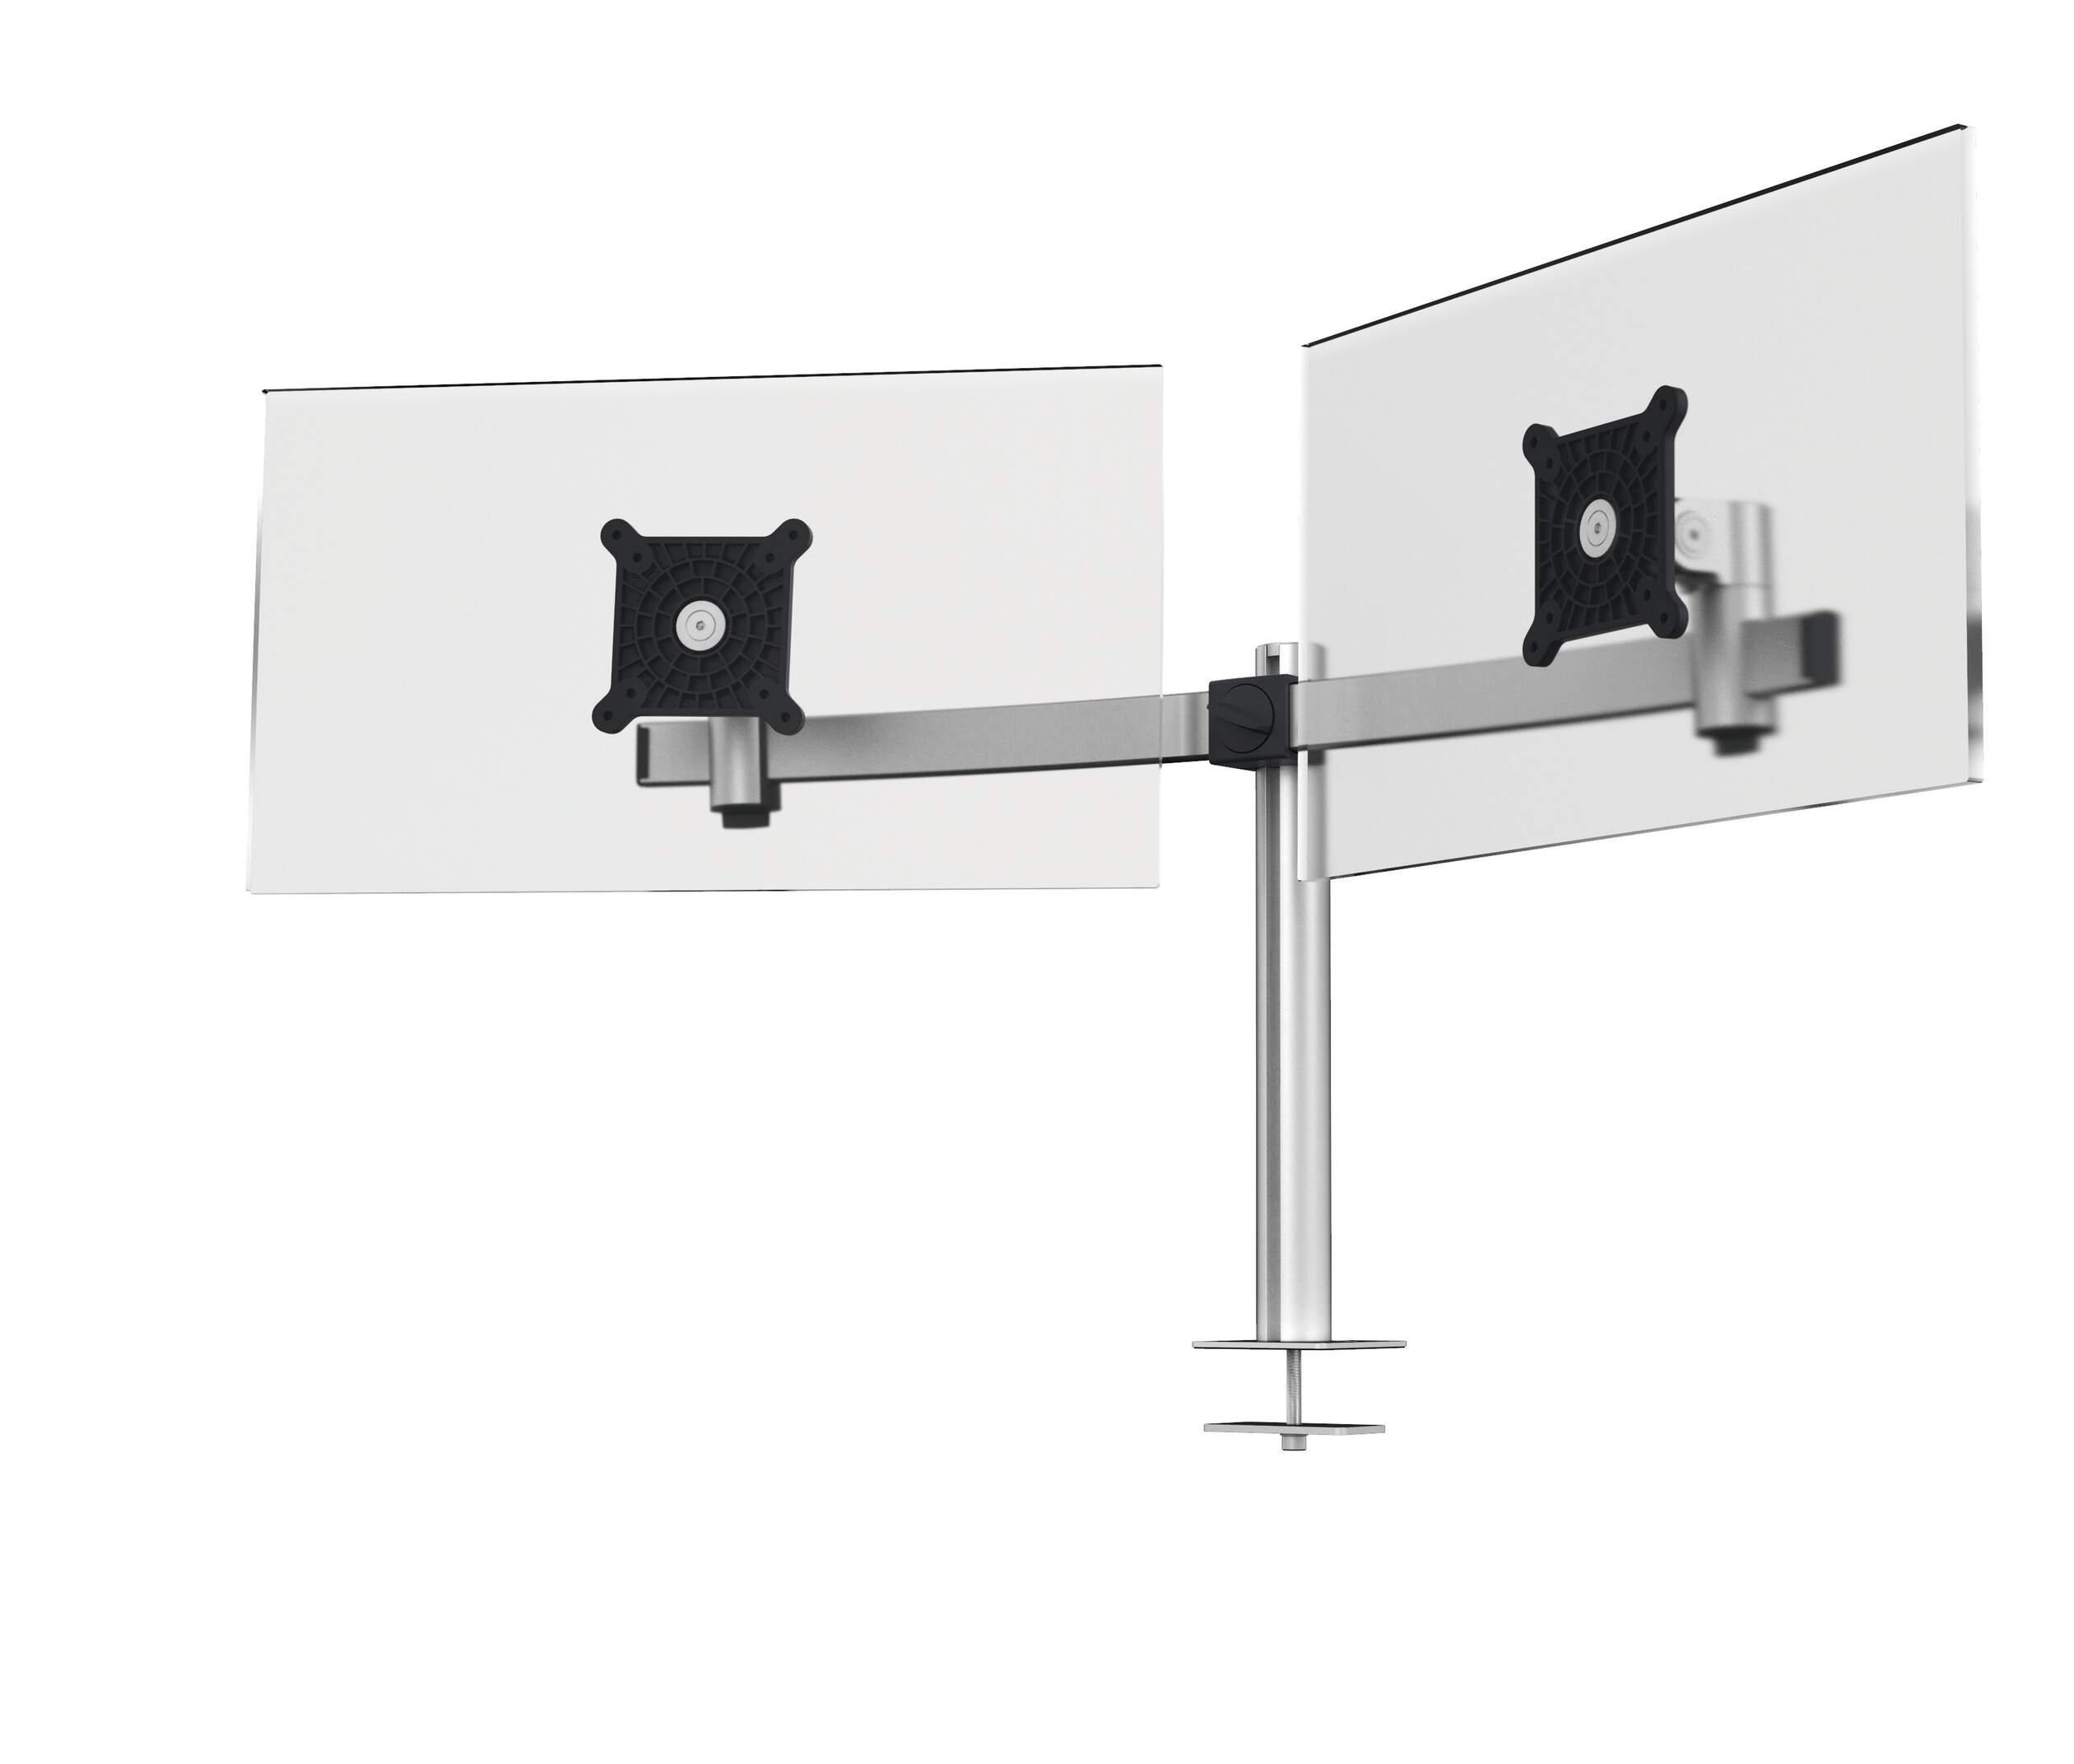 Monitor Mount for 2 Screens - Through-Desk Clamp Attachment